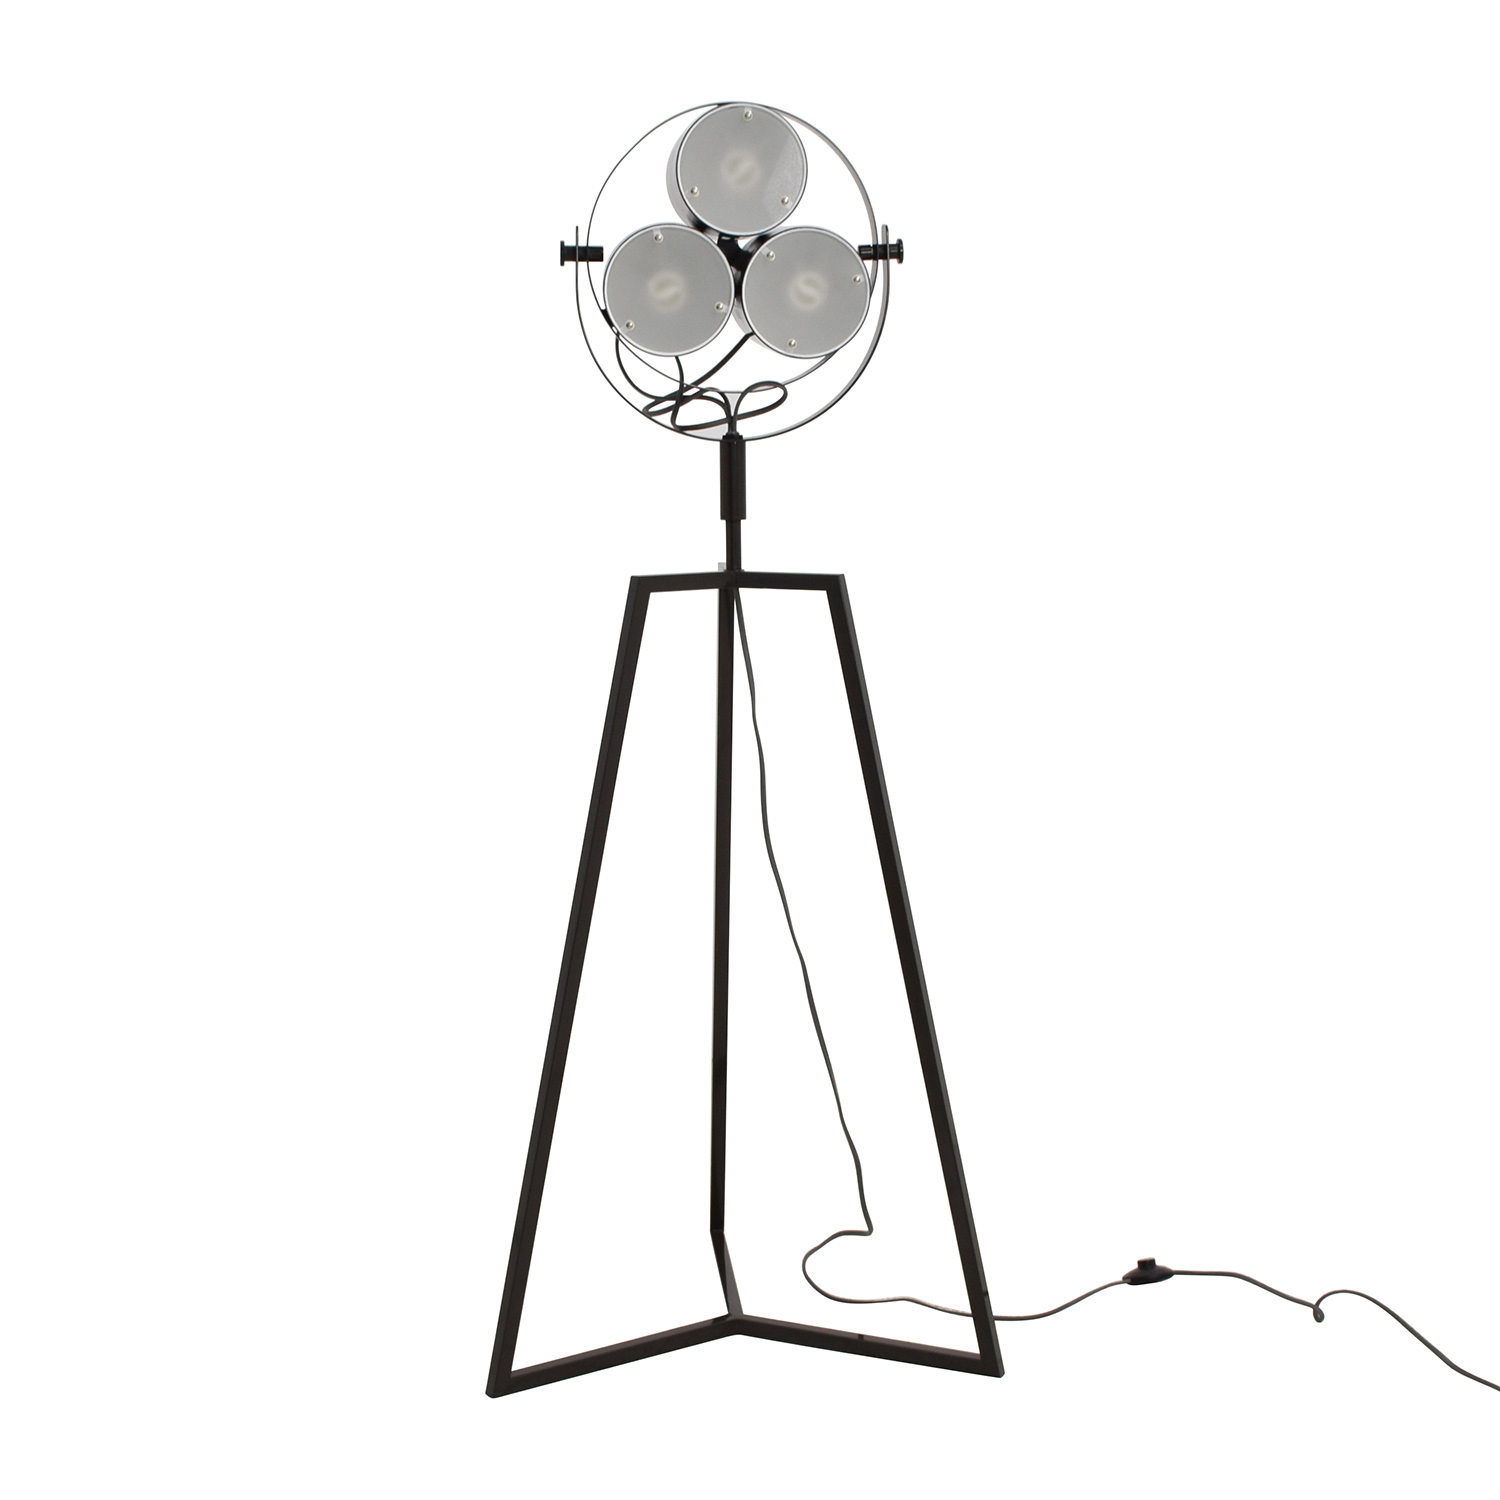 57 Off Cb2 Cb2 Signal Floor Lamp Decor intended for size 1500 X 1500